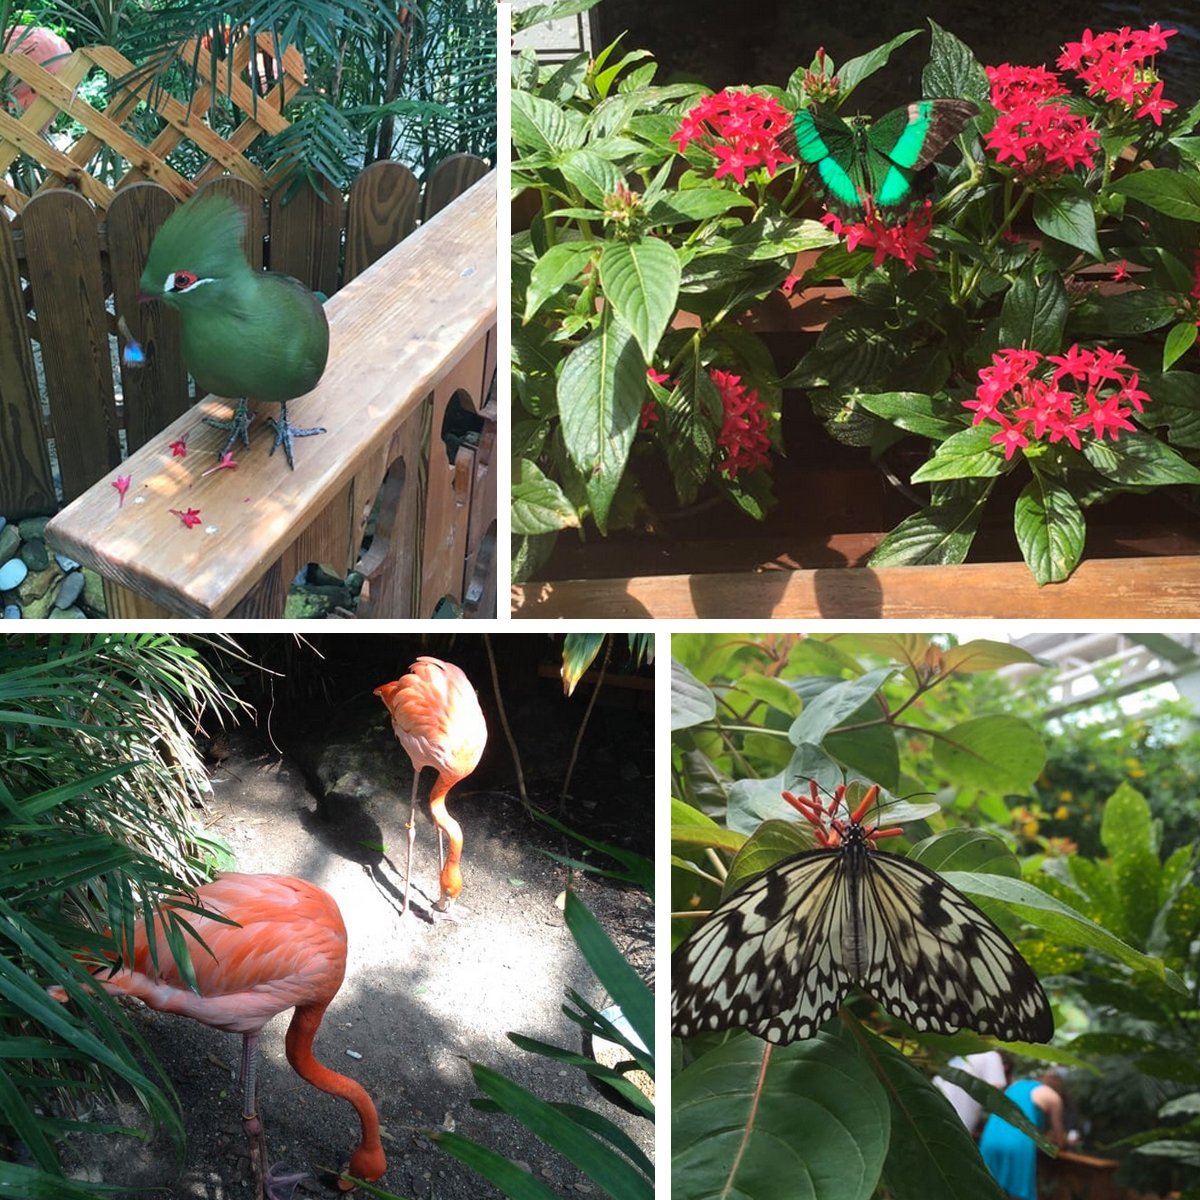 The Key West Butterfly And Nature Conservancy